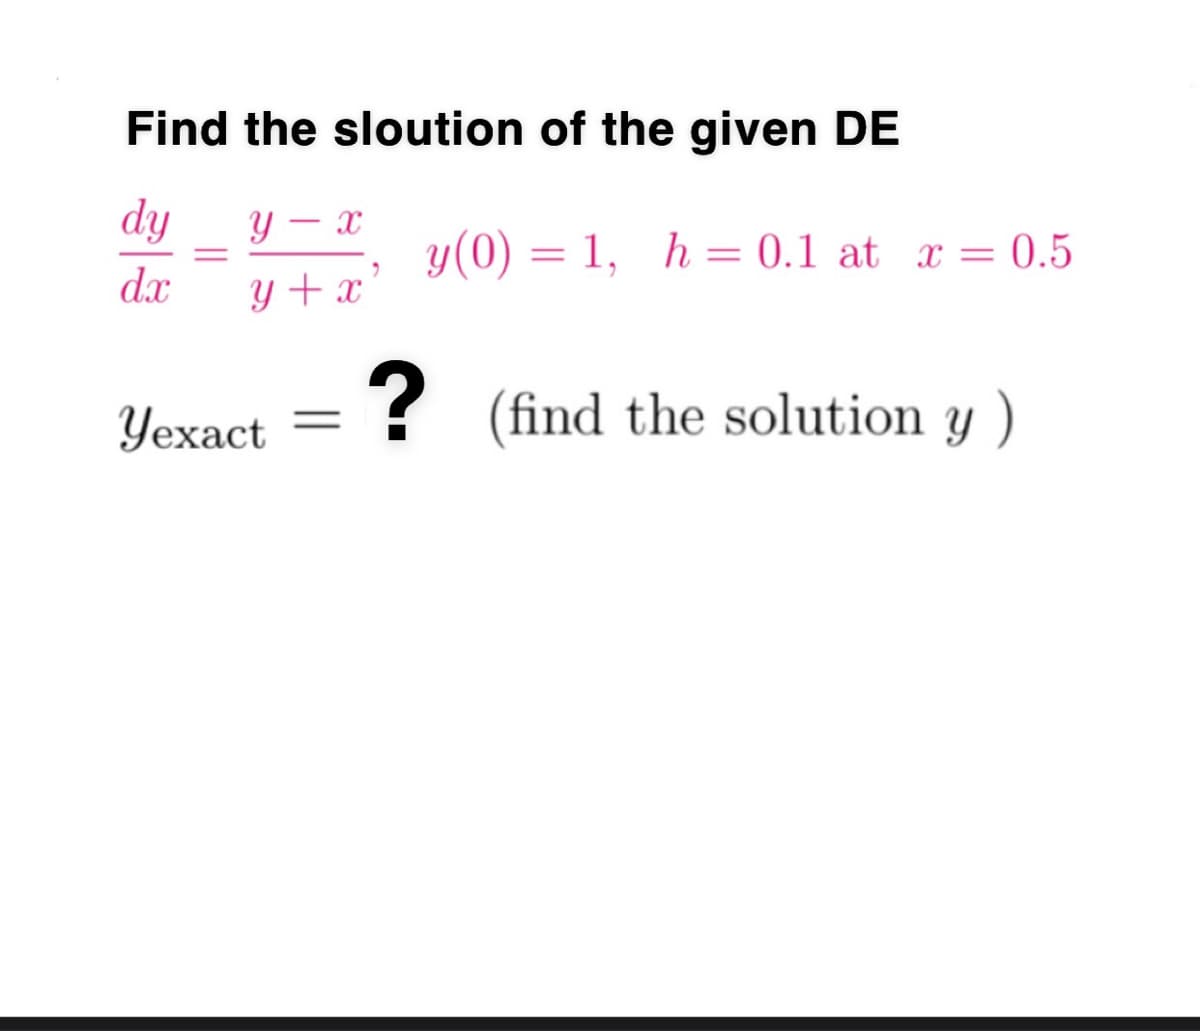 Find the sloution of the given DE
dy
Y
y(0) = 1, h= 0.1 at x = 0.5
dx
Y + x
Уехаct
? (find the solution y )
